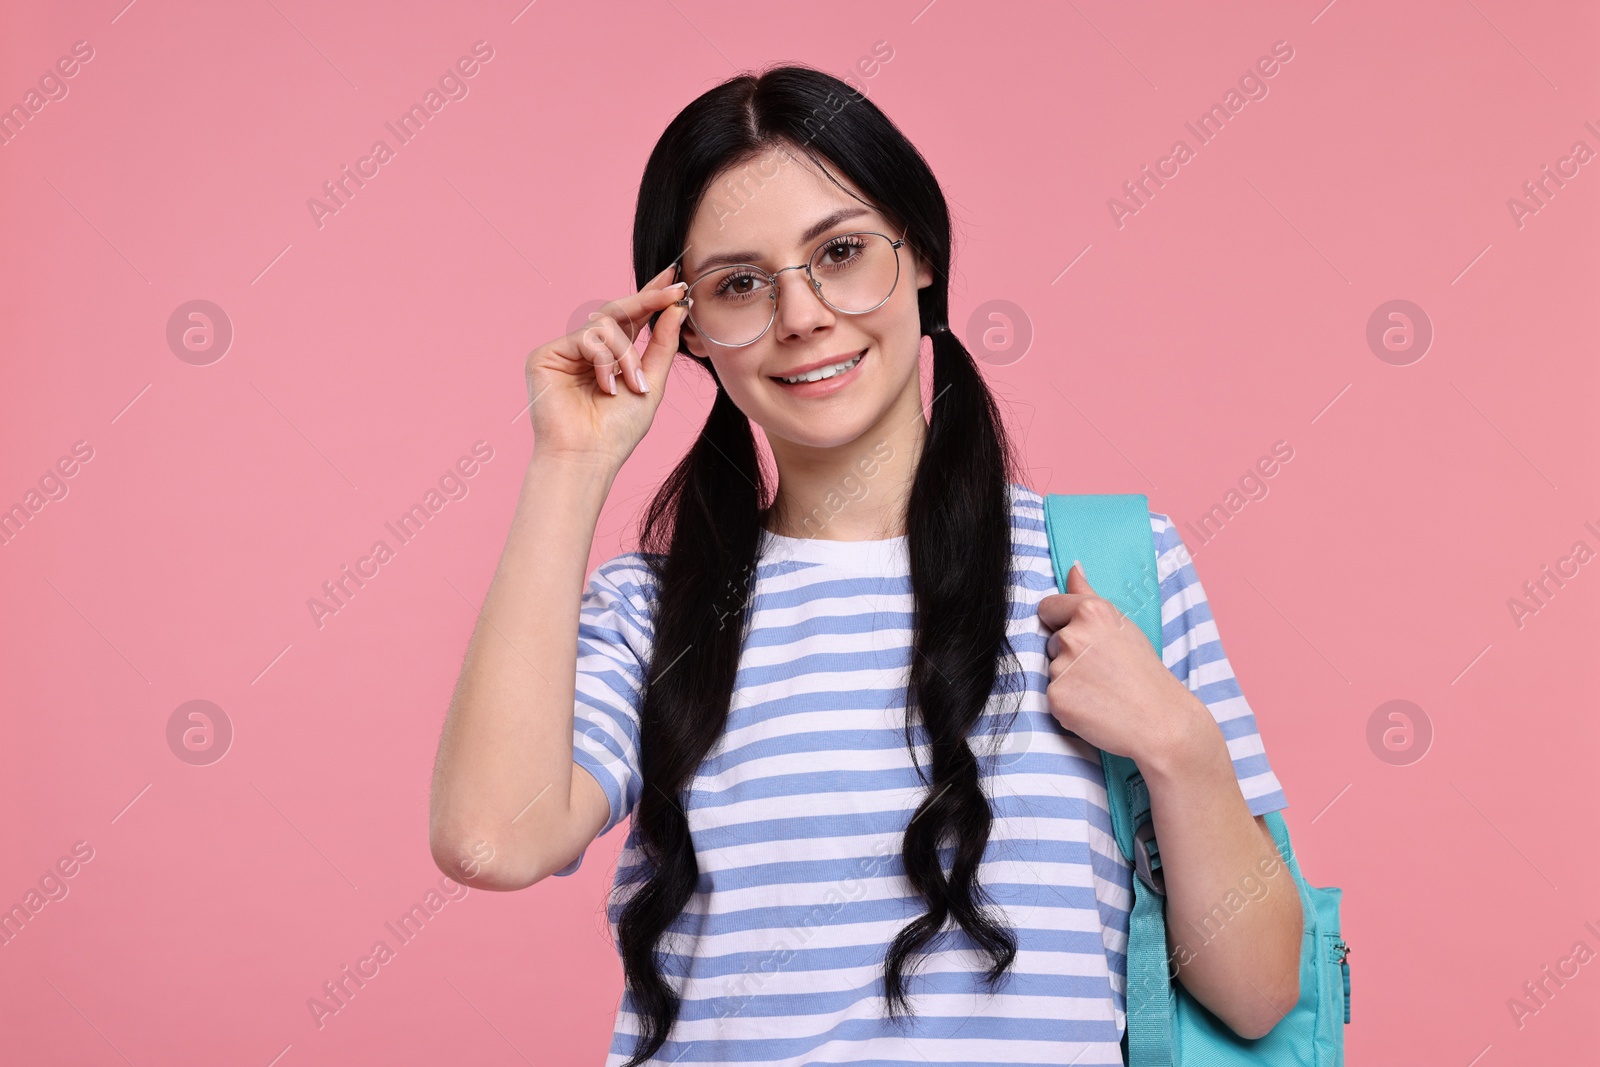 Photo of Smiling student with backpack on pink background